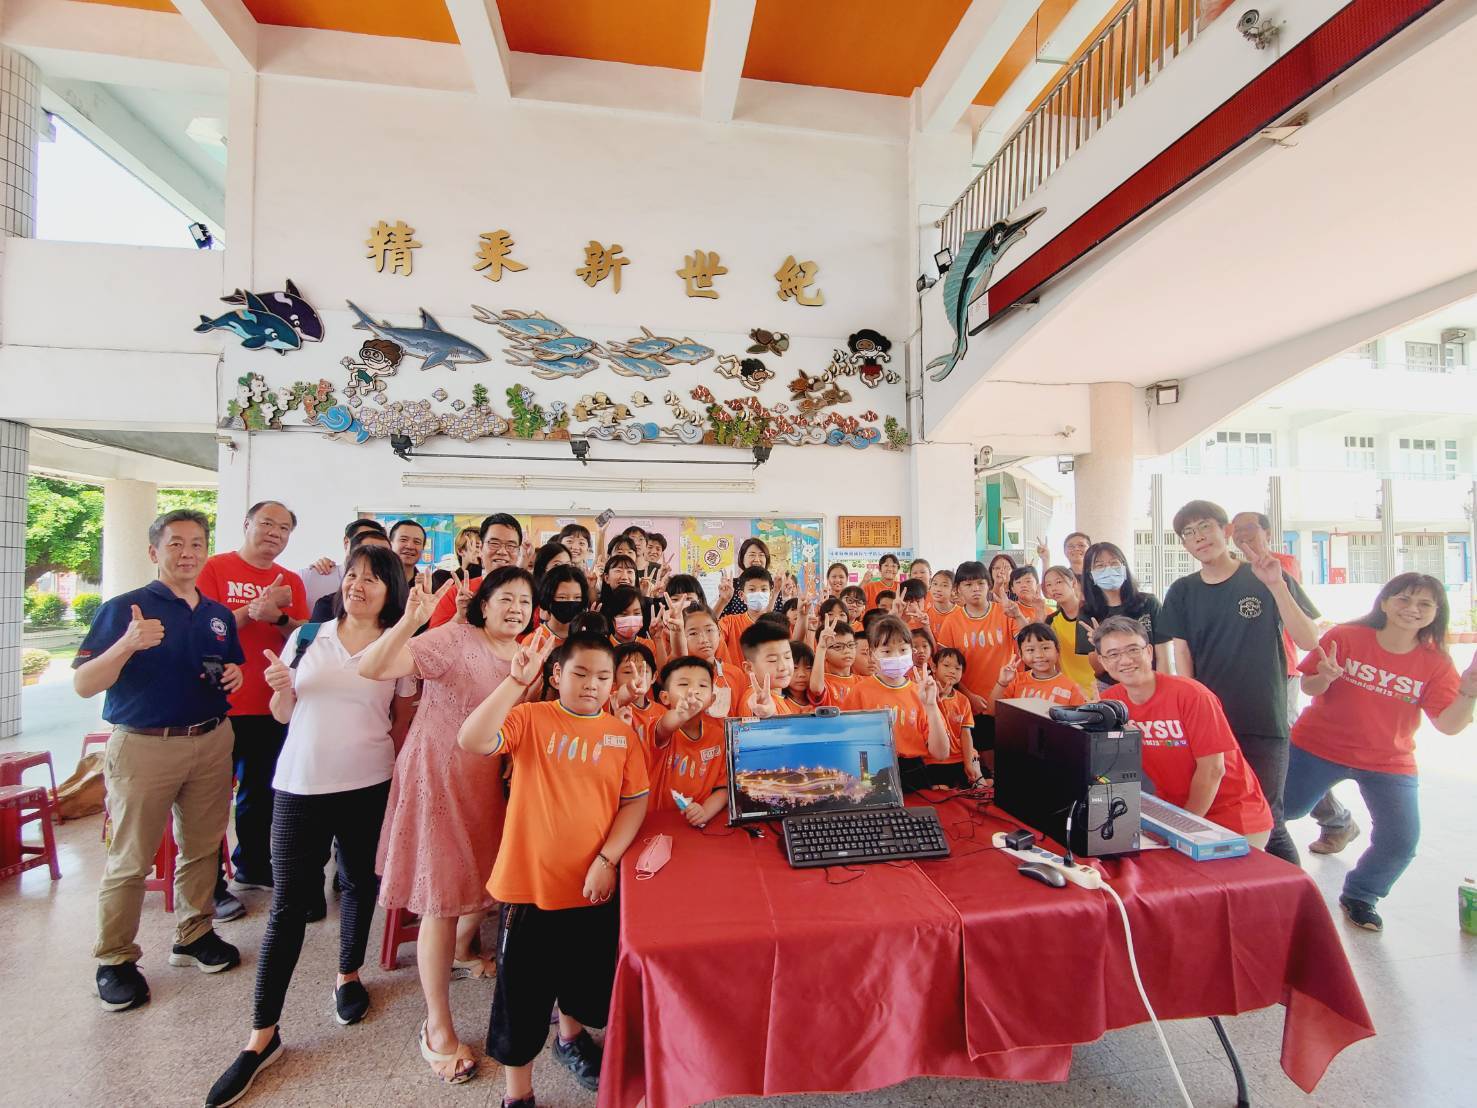 The group photo of volunteers, Linbian Primary School faculty, and students